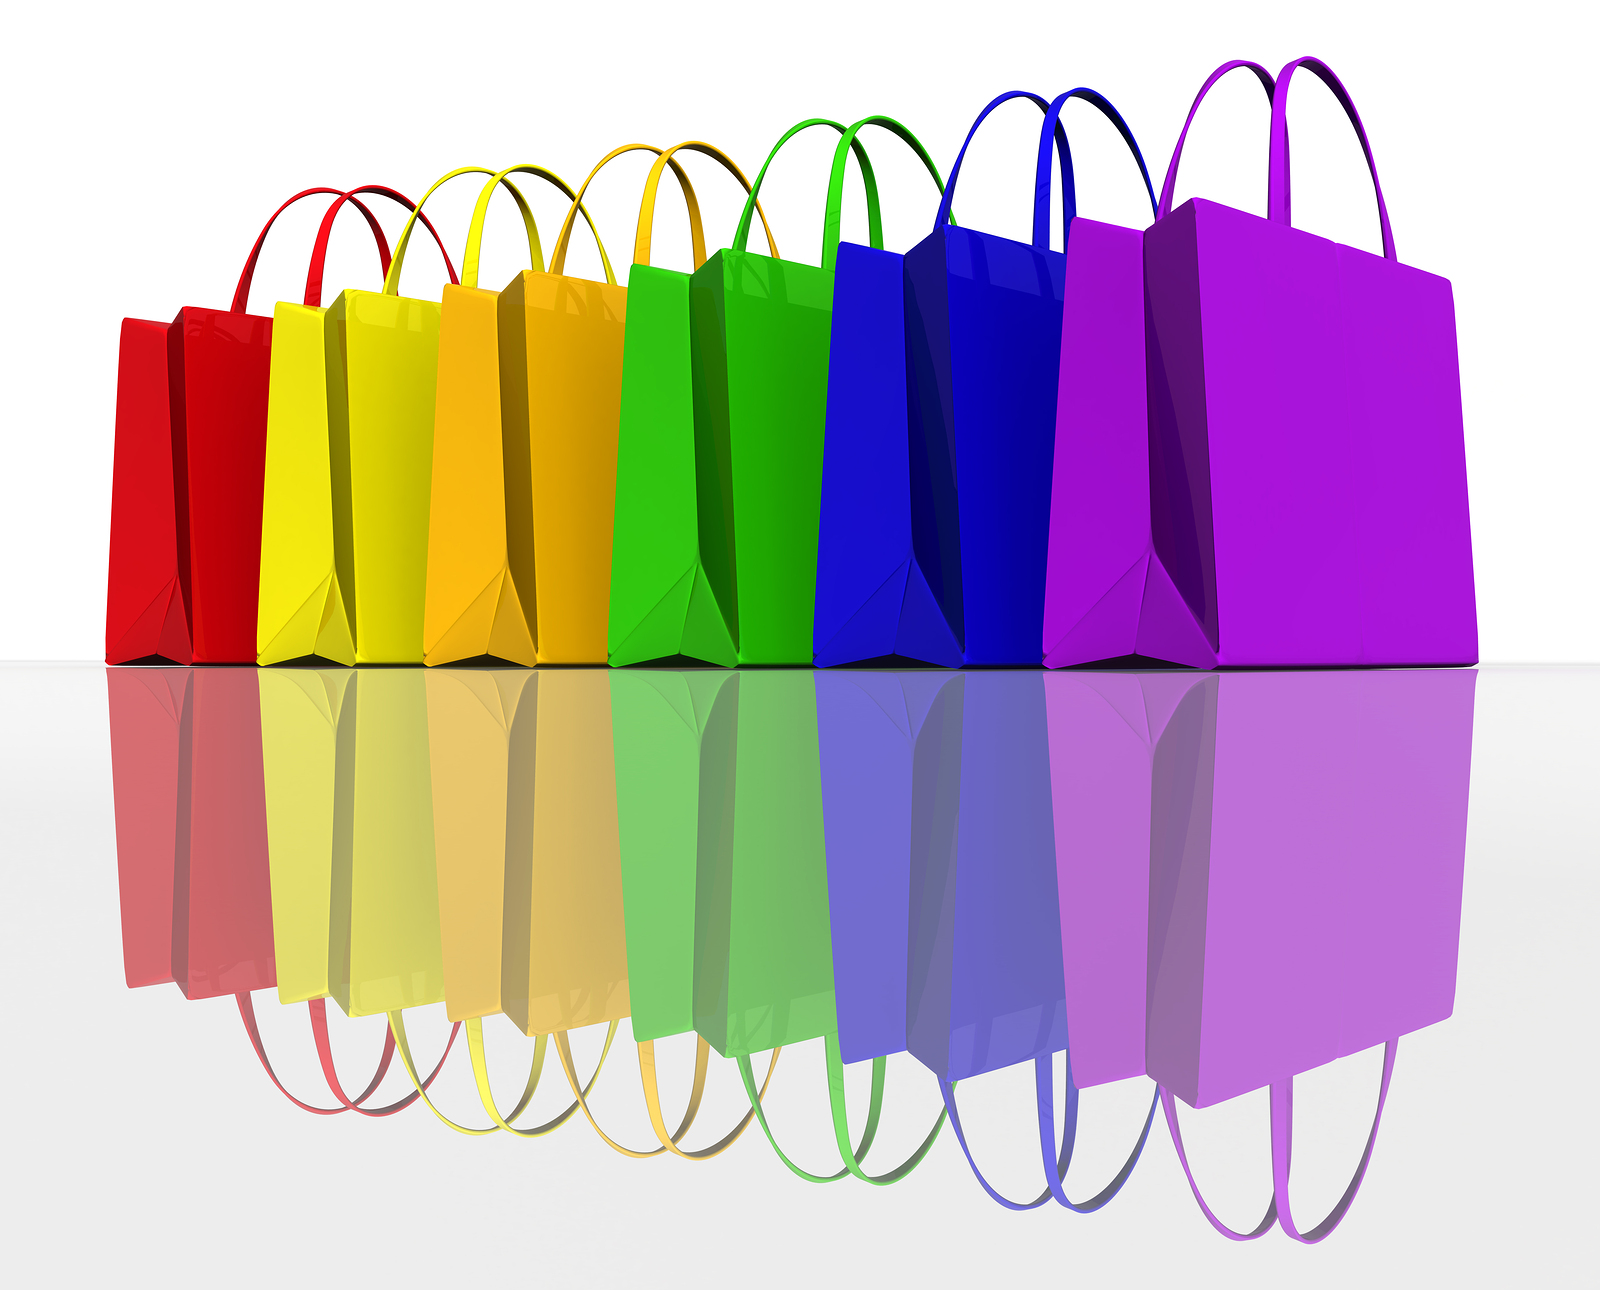 Pictures Of Shopping Bags - ClipArt Best